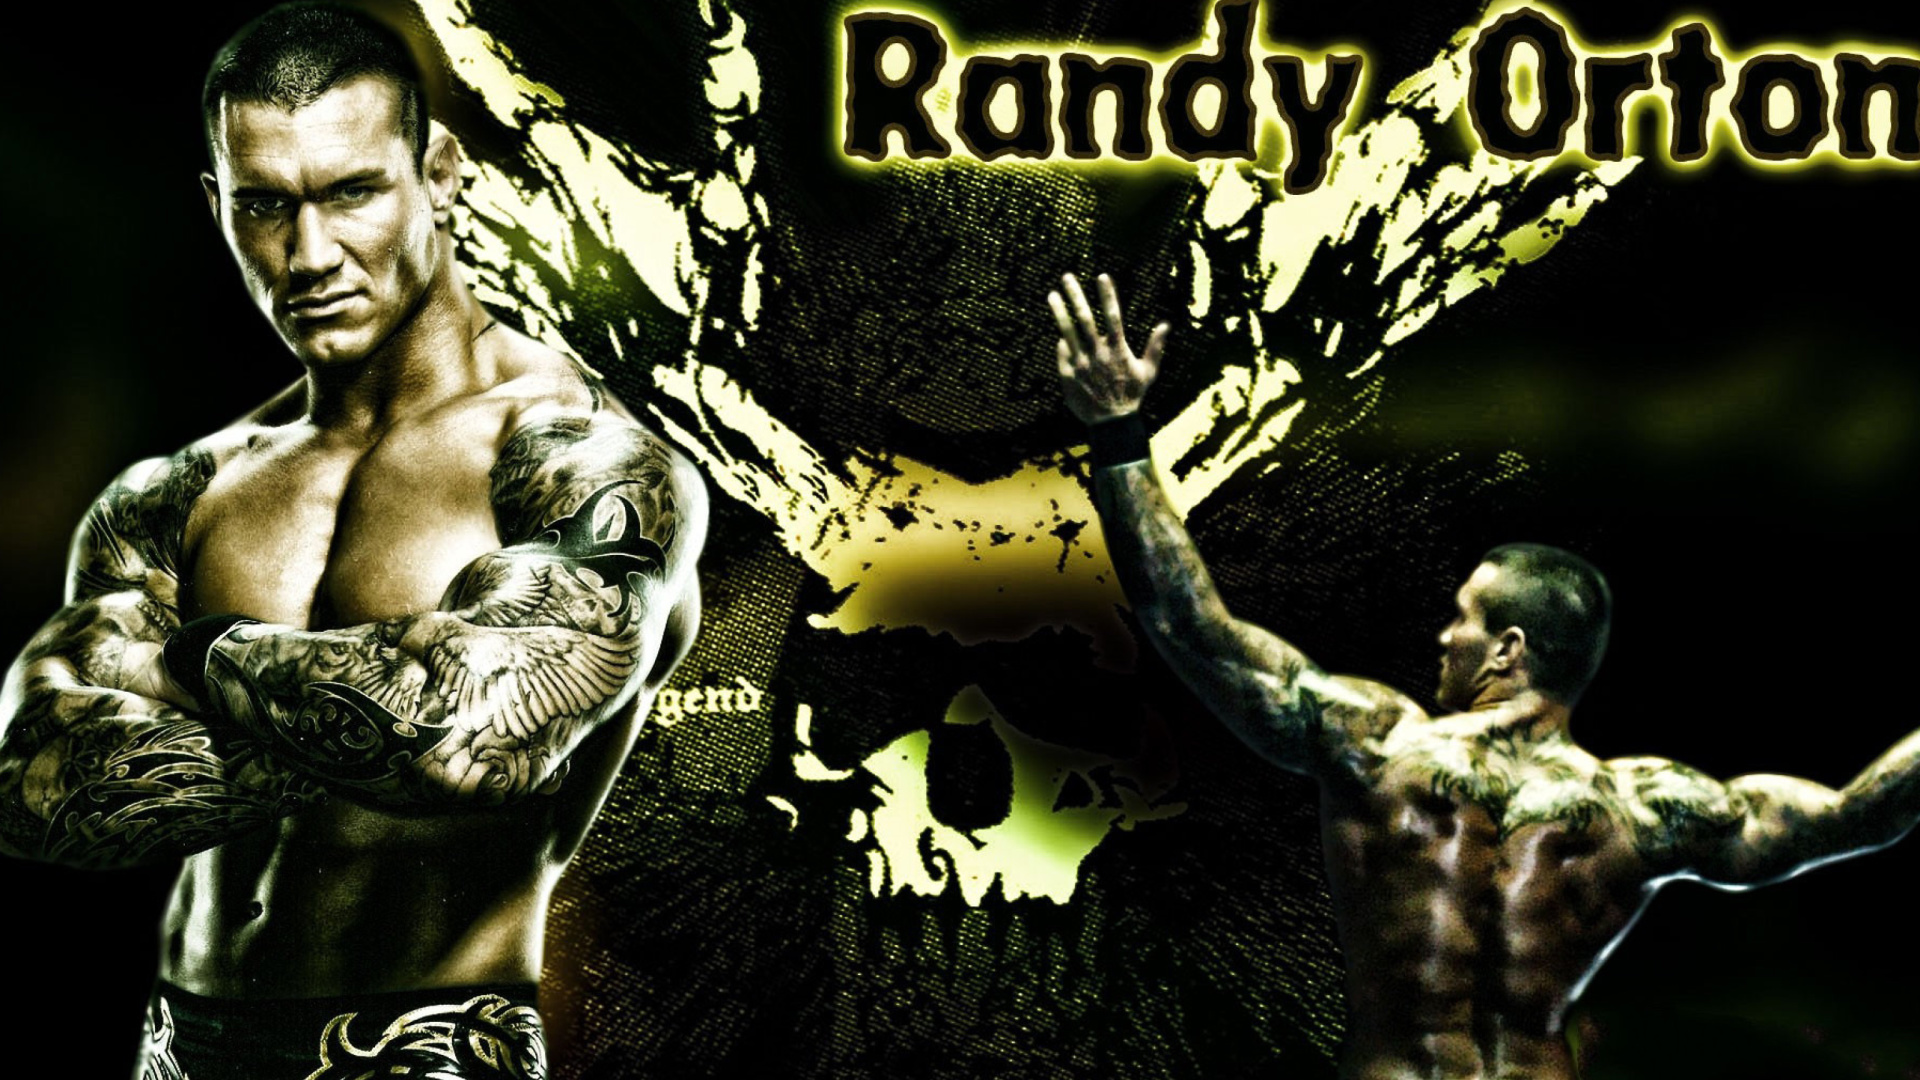 Randy Orton Wallpaper Image Photos Pictures Background